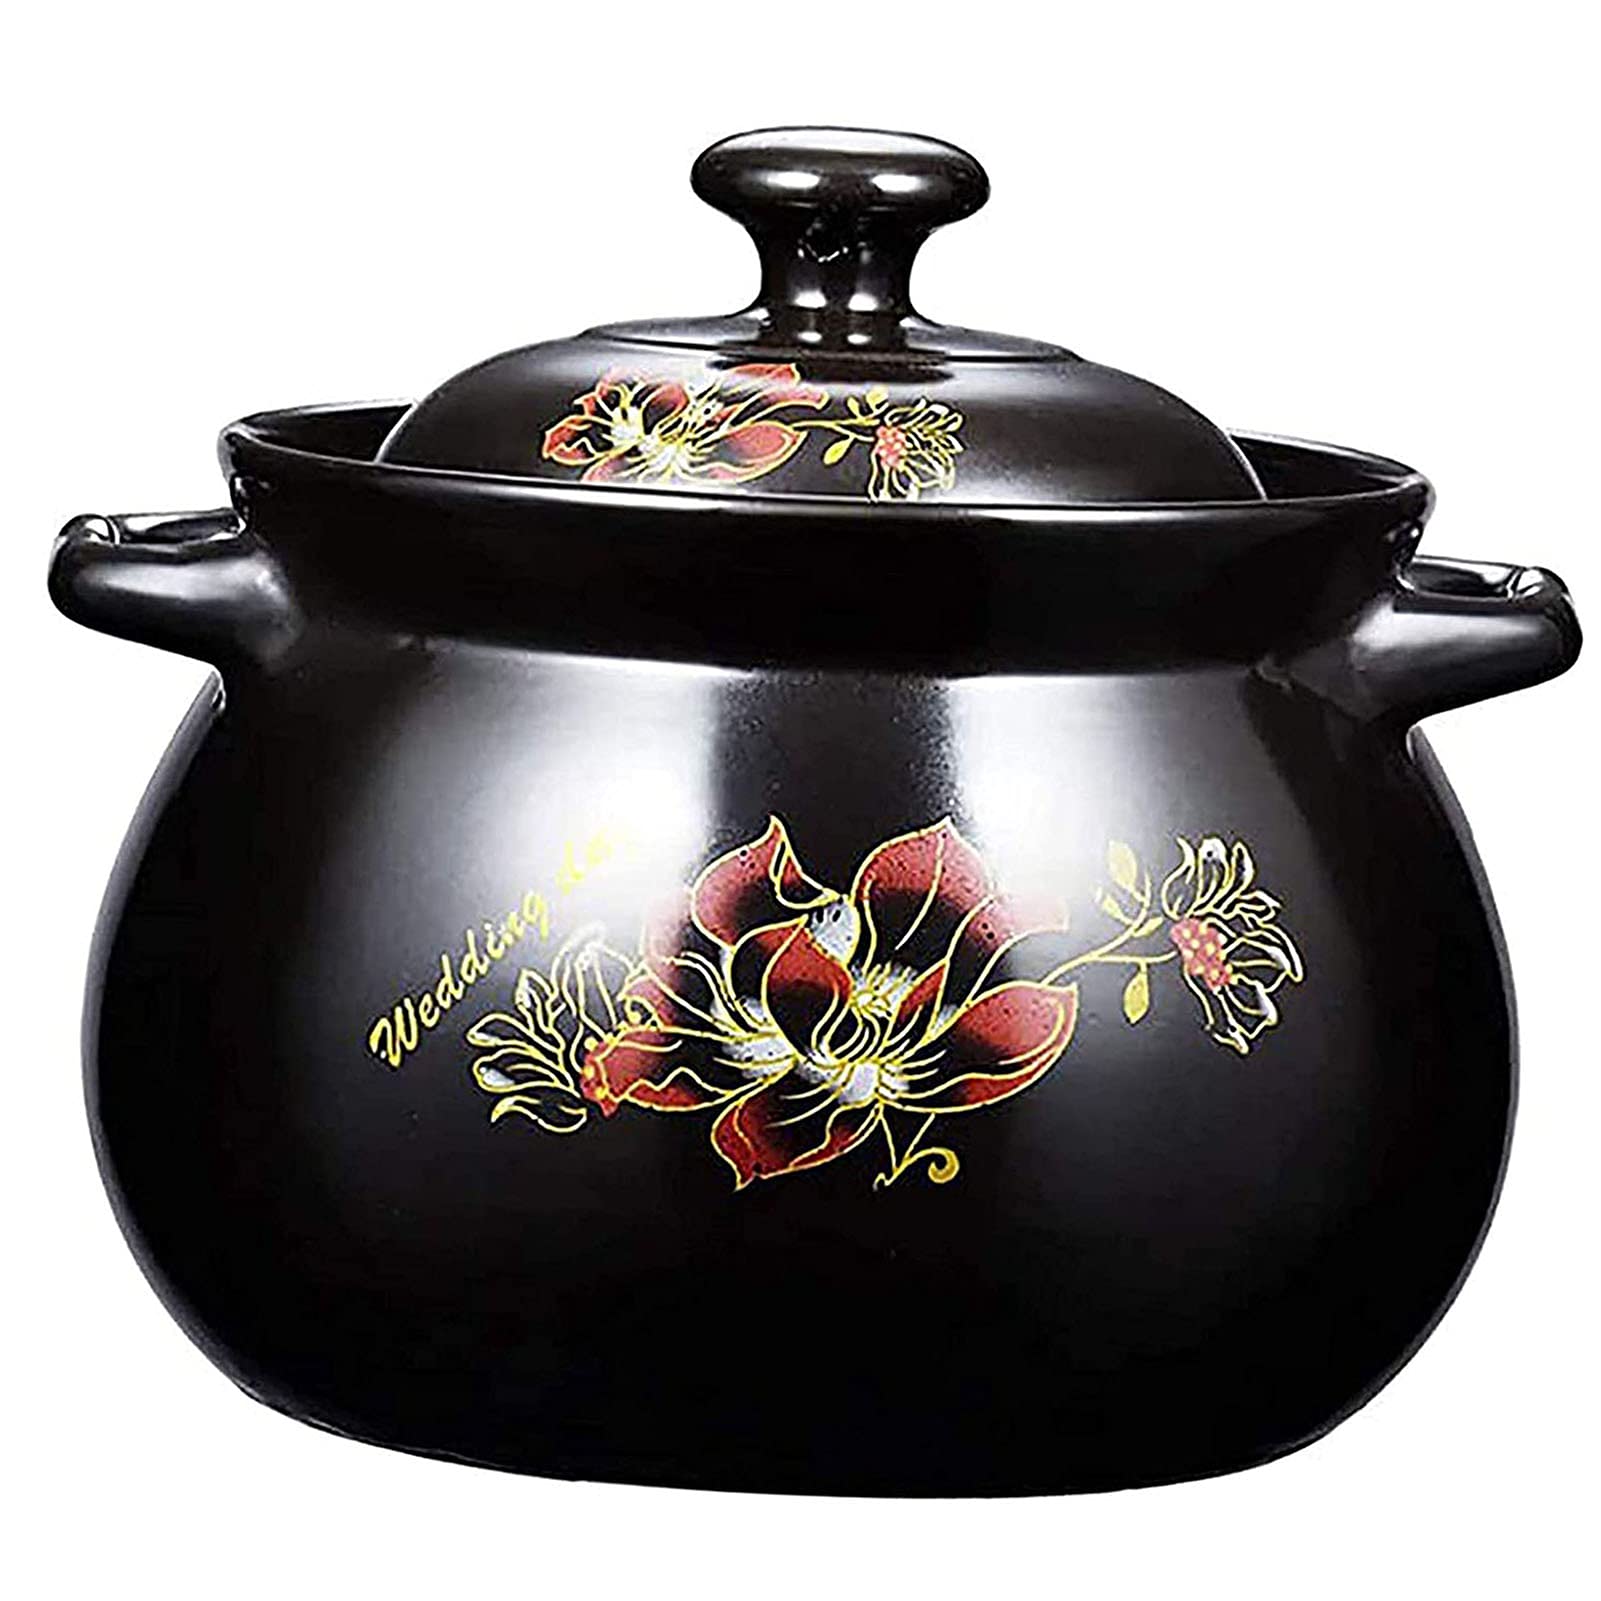 Hengqiyuan Casserole Dish with Lid,Ceramic Casserole Pot Non Stick Stock Pot，Casserole, Clay Pot for Cooking, Oven Safe, Stone Pot Made of Natural Clay，7.3L